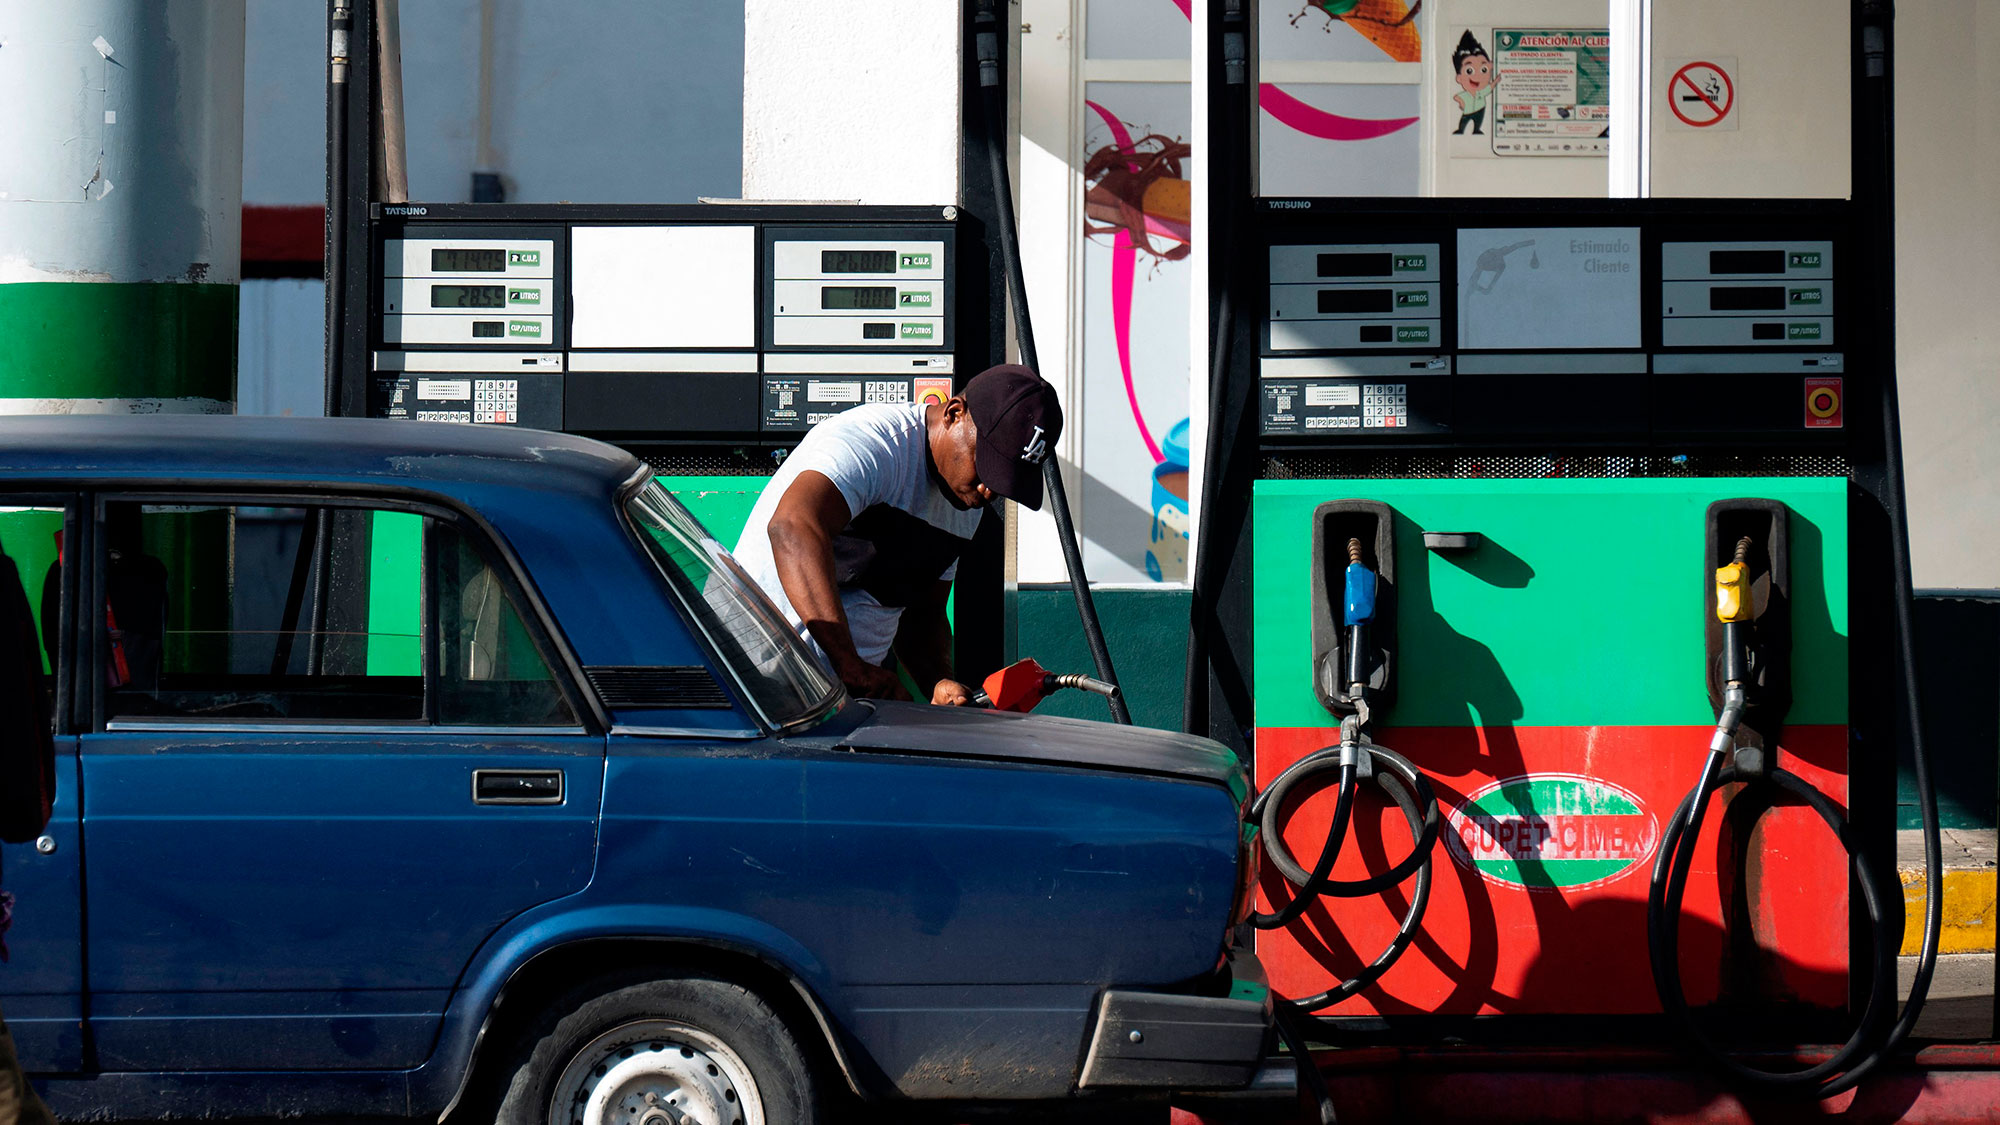 500% increase in fuel prices in Cuba will come into effect from March 1